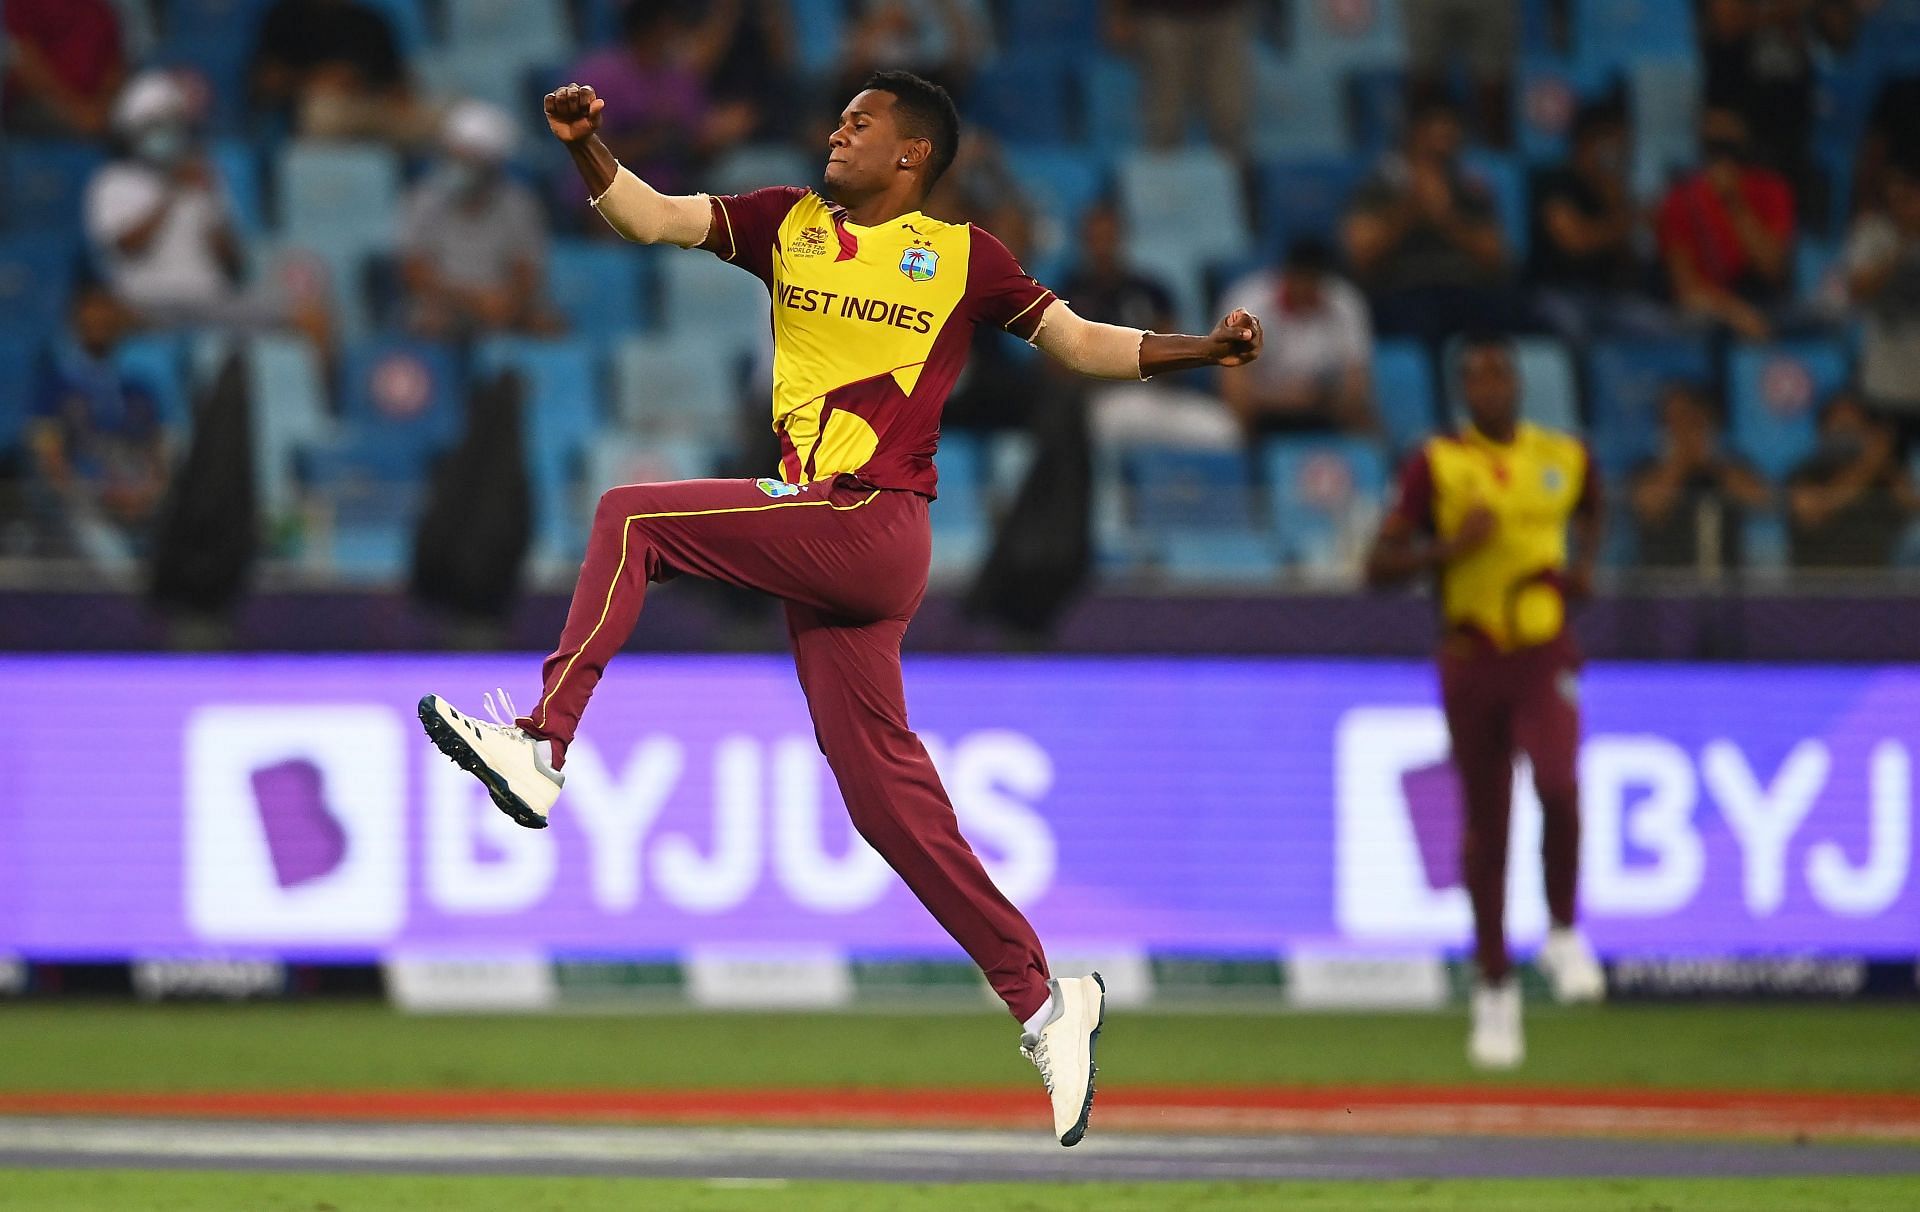 Akeal Hosein celebrates the wicket of Liam Livingstone. Pic: Getty Images